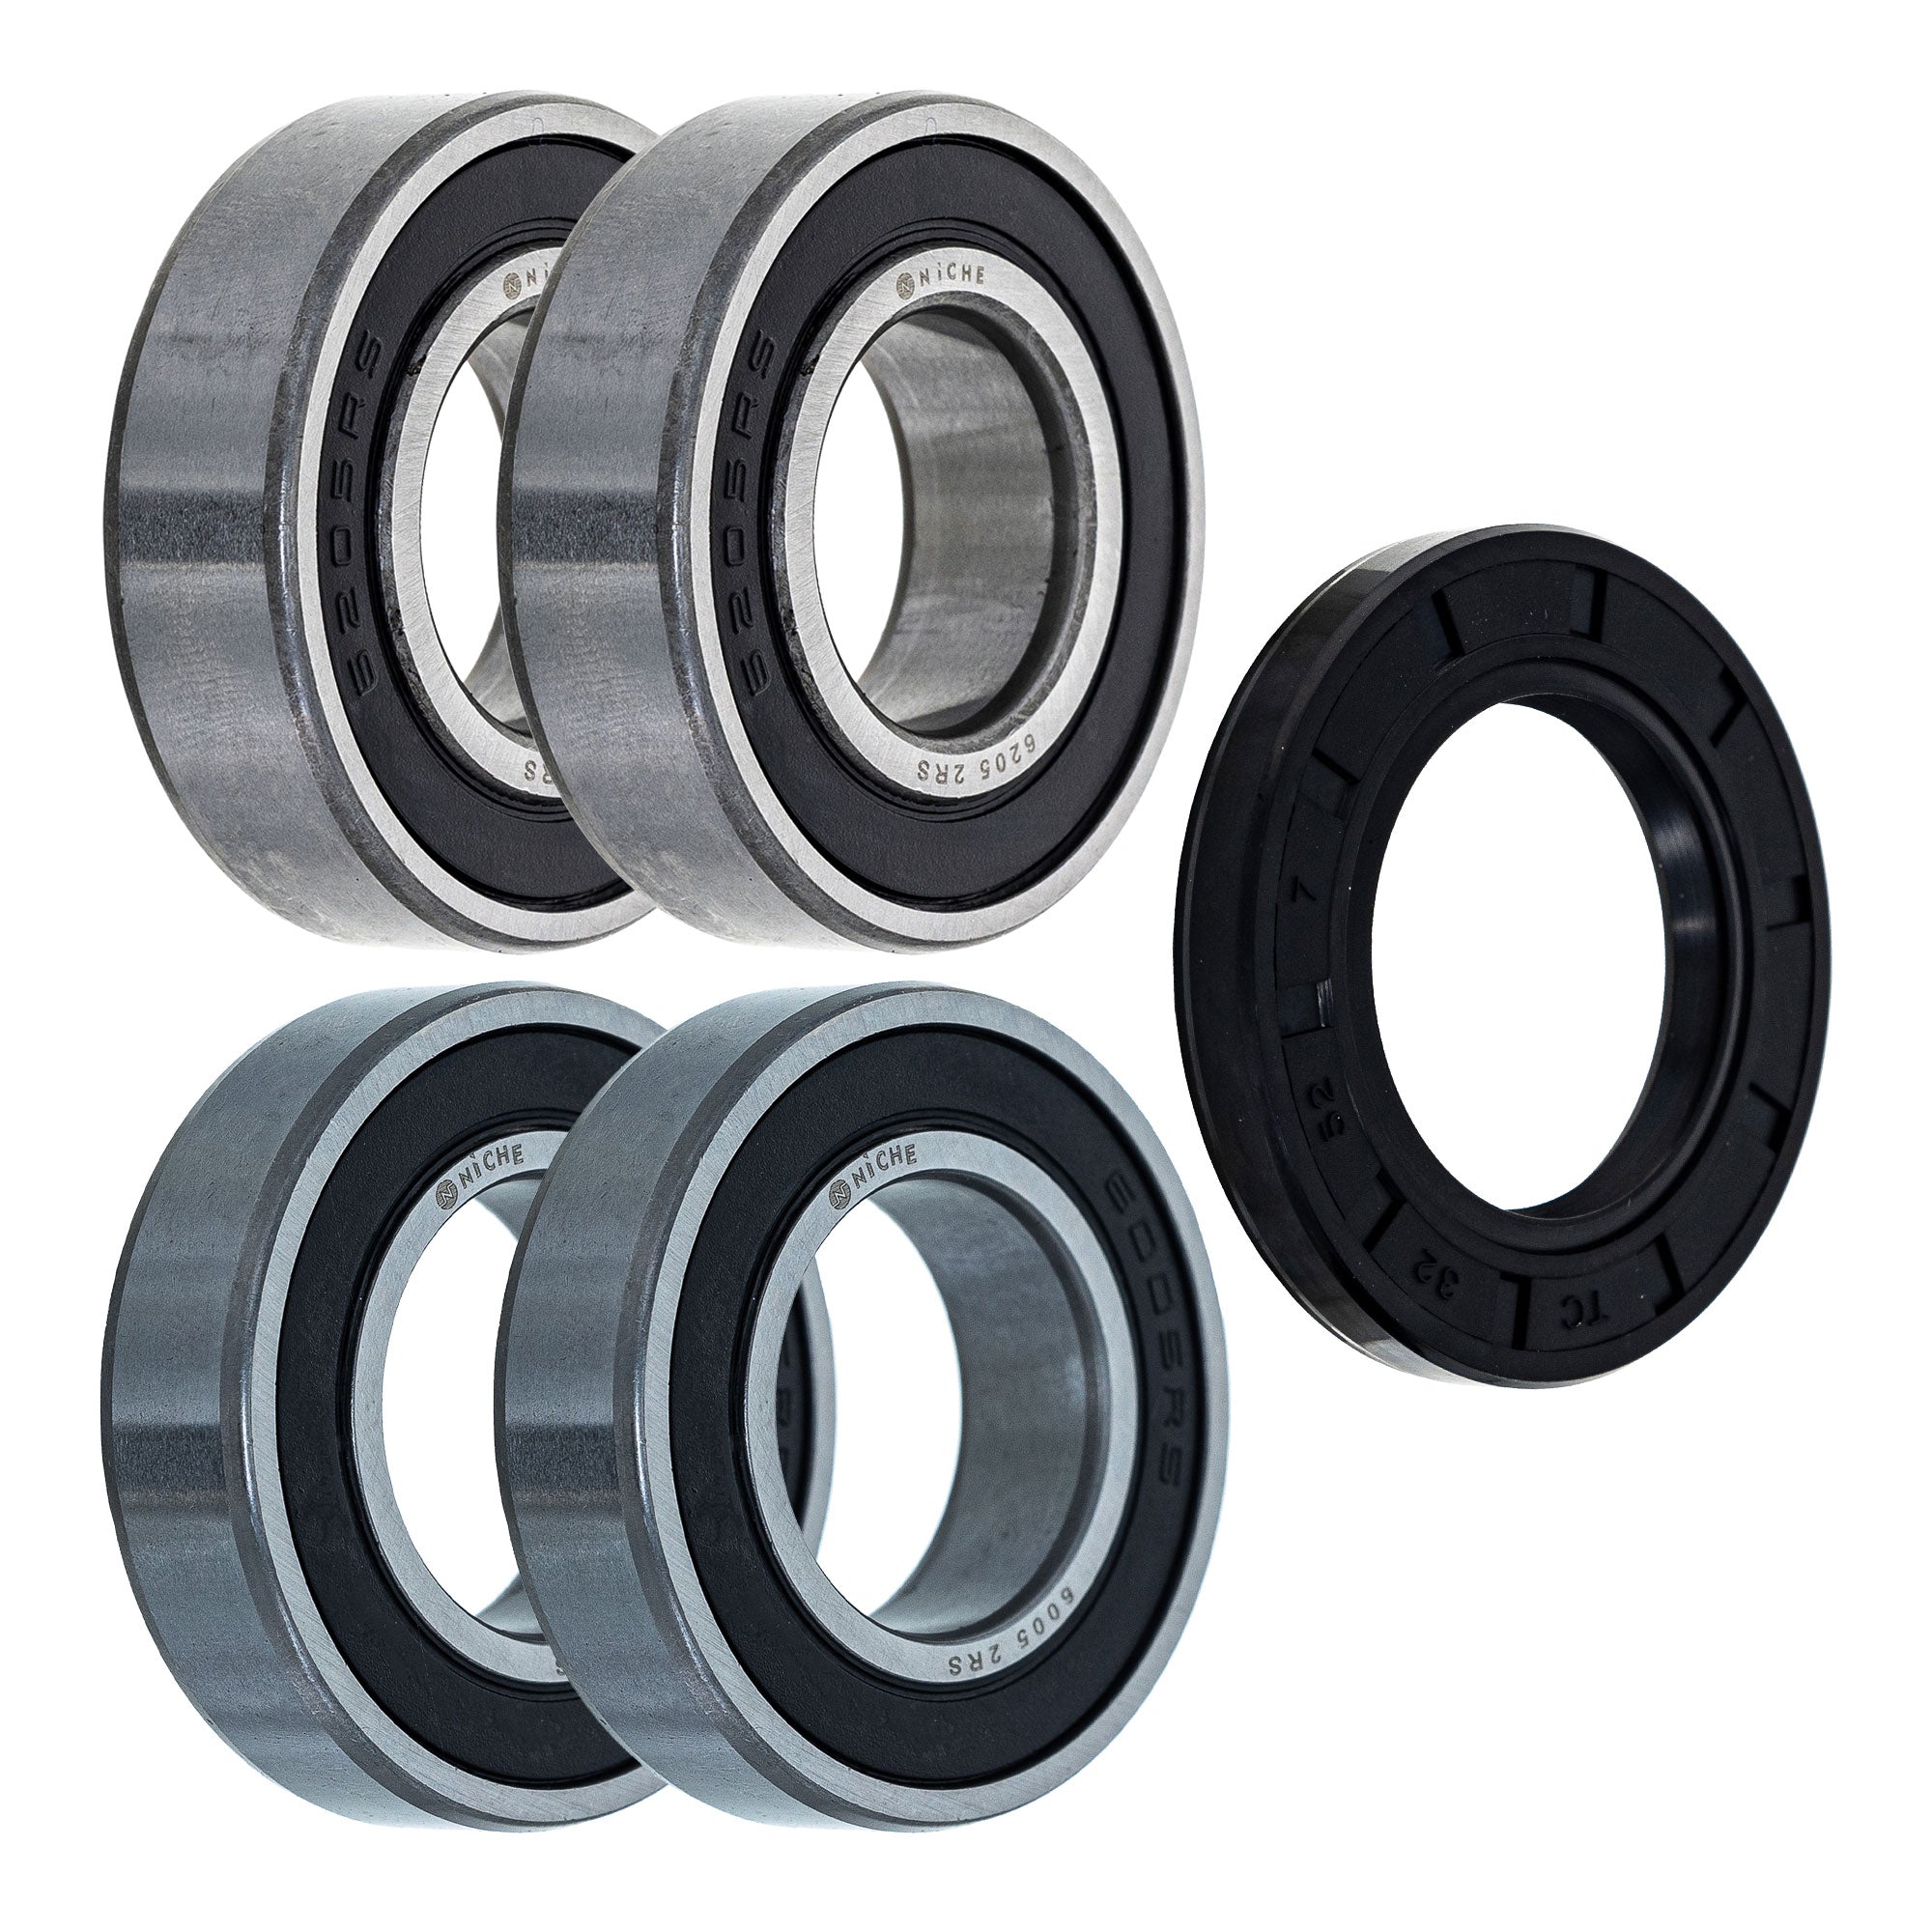 Wheel Bearing Seal Kit for zOTHER Ref No 500 NICHE MK1009021